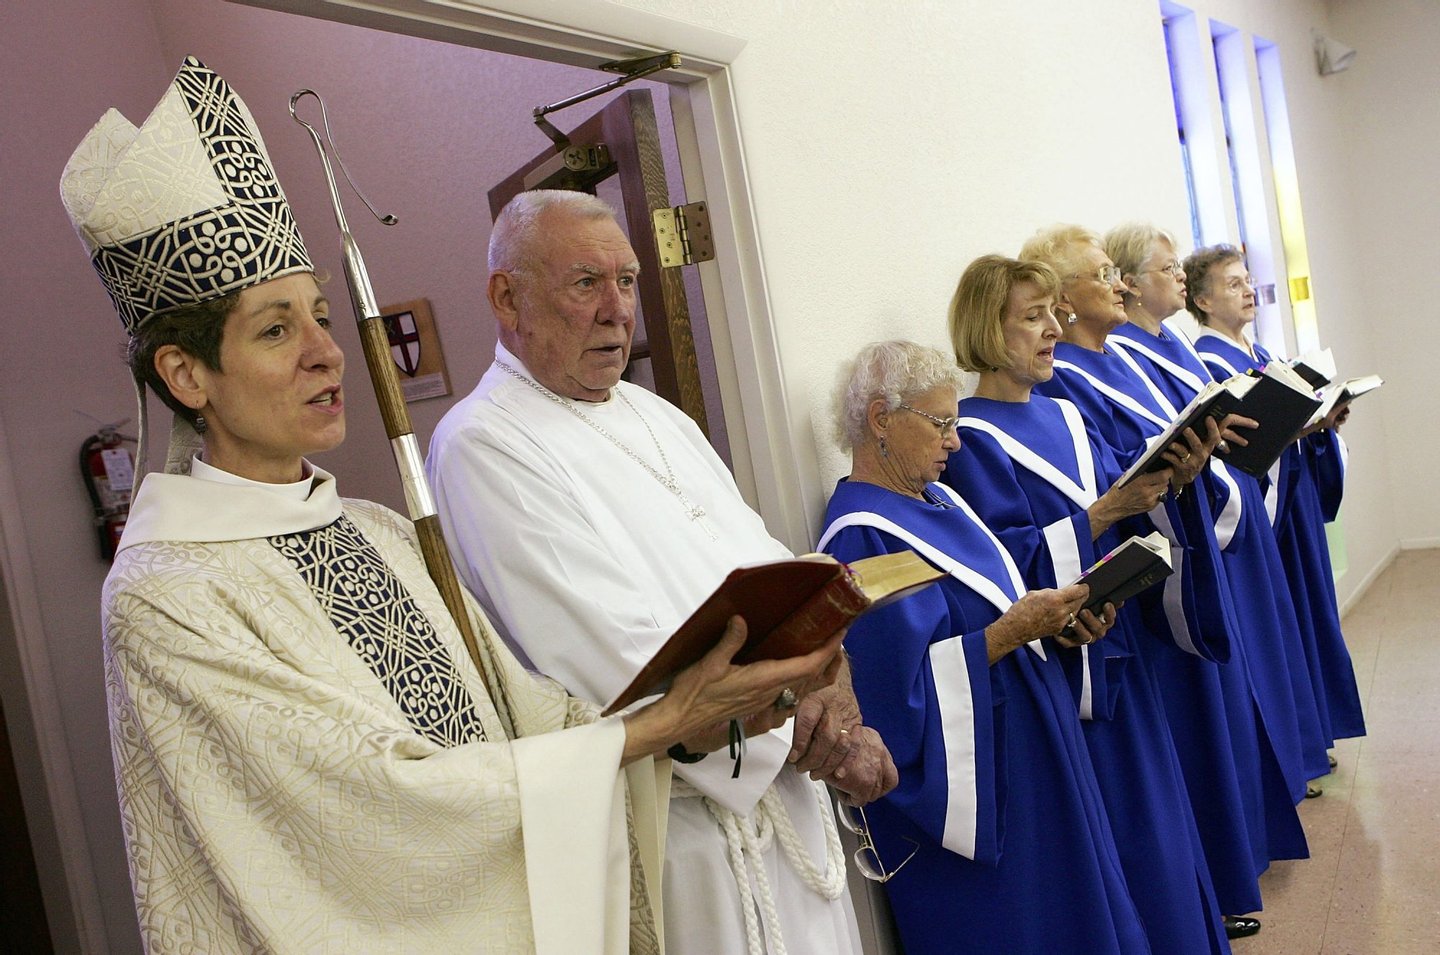 BULLHEAD CITY, AZ - JULY 02: Bishop Katharine Jefferts Schori (L) and chalice bearer Dick Studeny (2nd L) sing during the recessional of a service at The Episcopal Church of the Holy Spirit July 2, 2006 in Bullhead City, Arizona. Schori is the first female presiding bishop-elect for the Episcopal Church. (Photo by Ethan Miller/Getty Images)